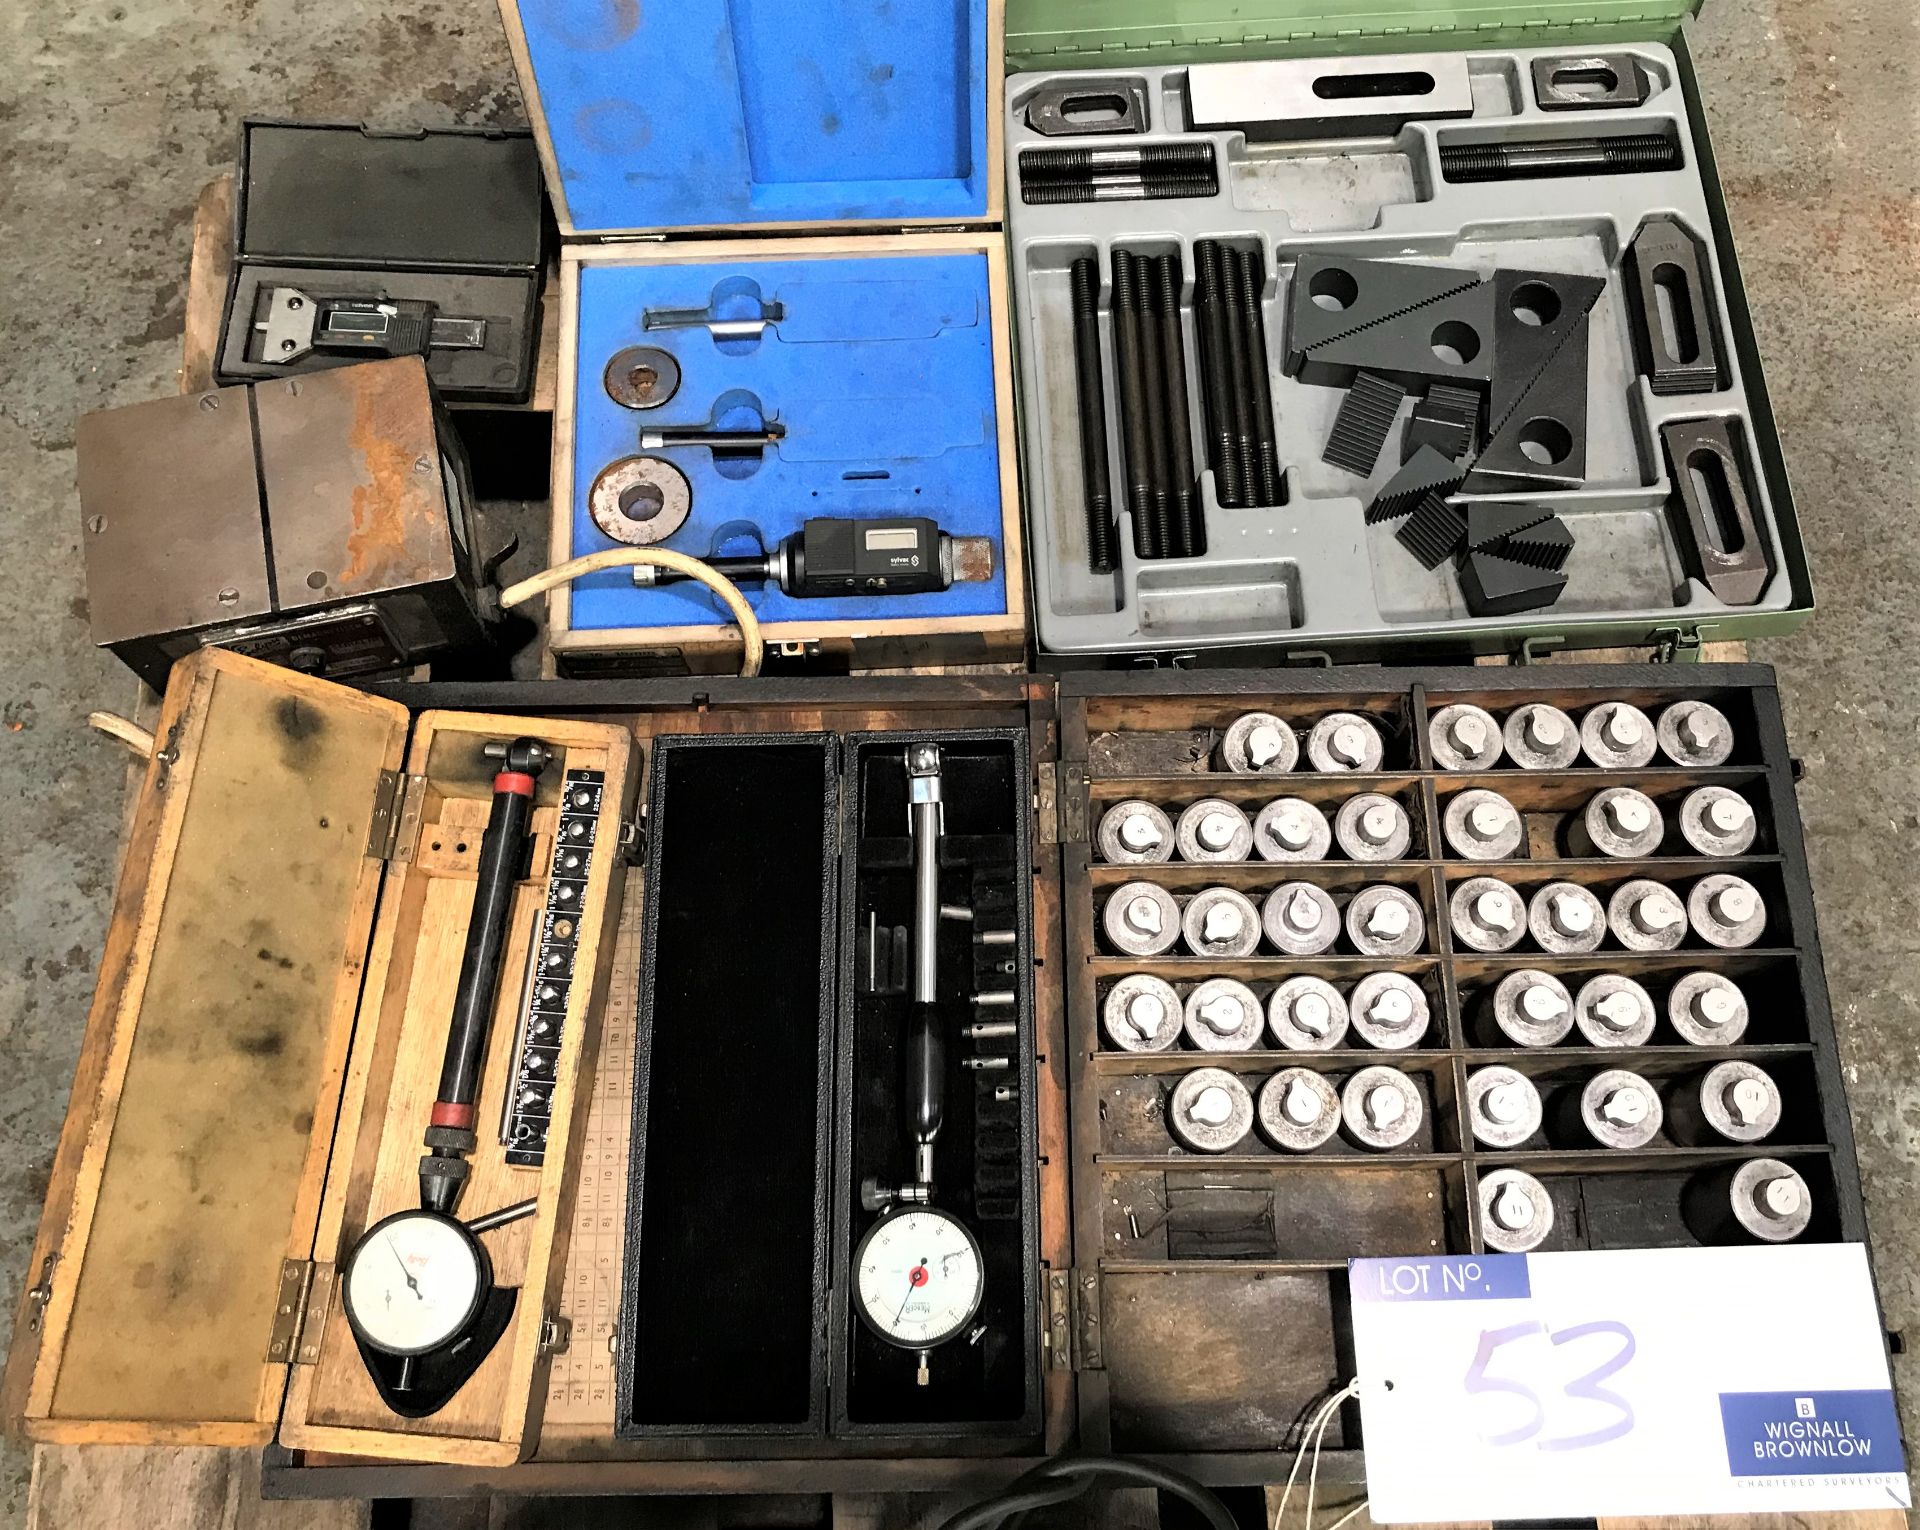 A Quantity of Miscellaneous Tools and Equipment. - Image 2 of 3